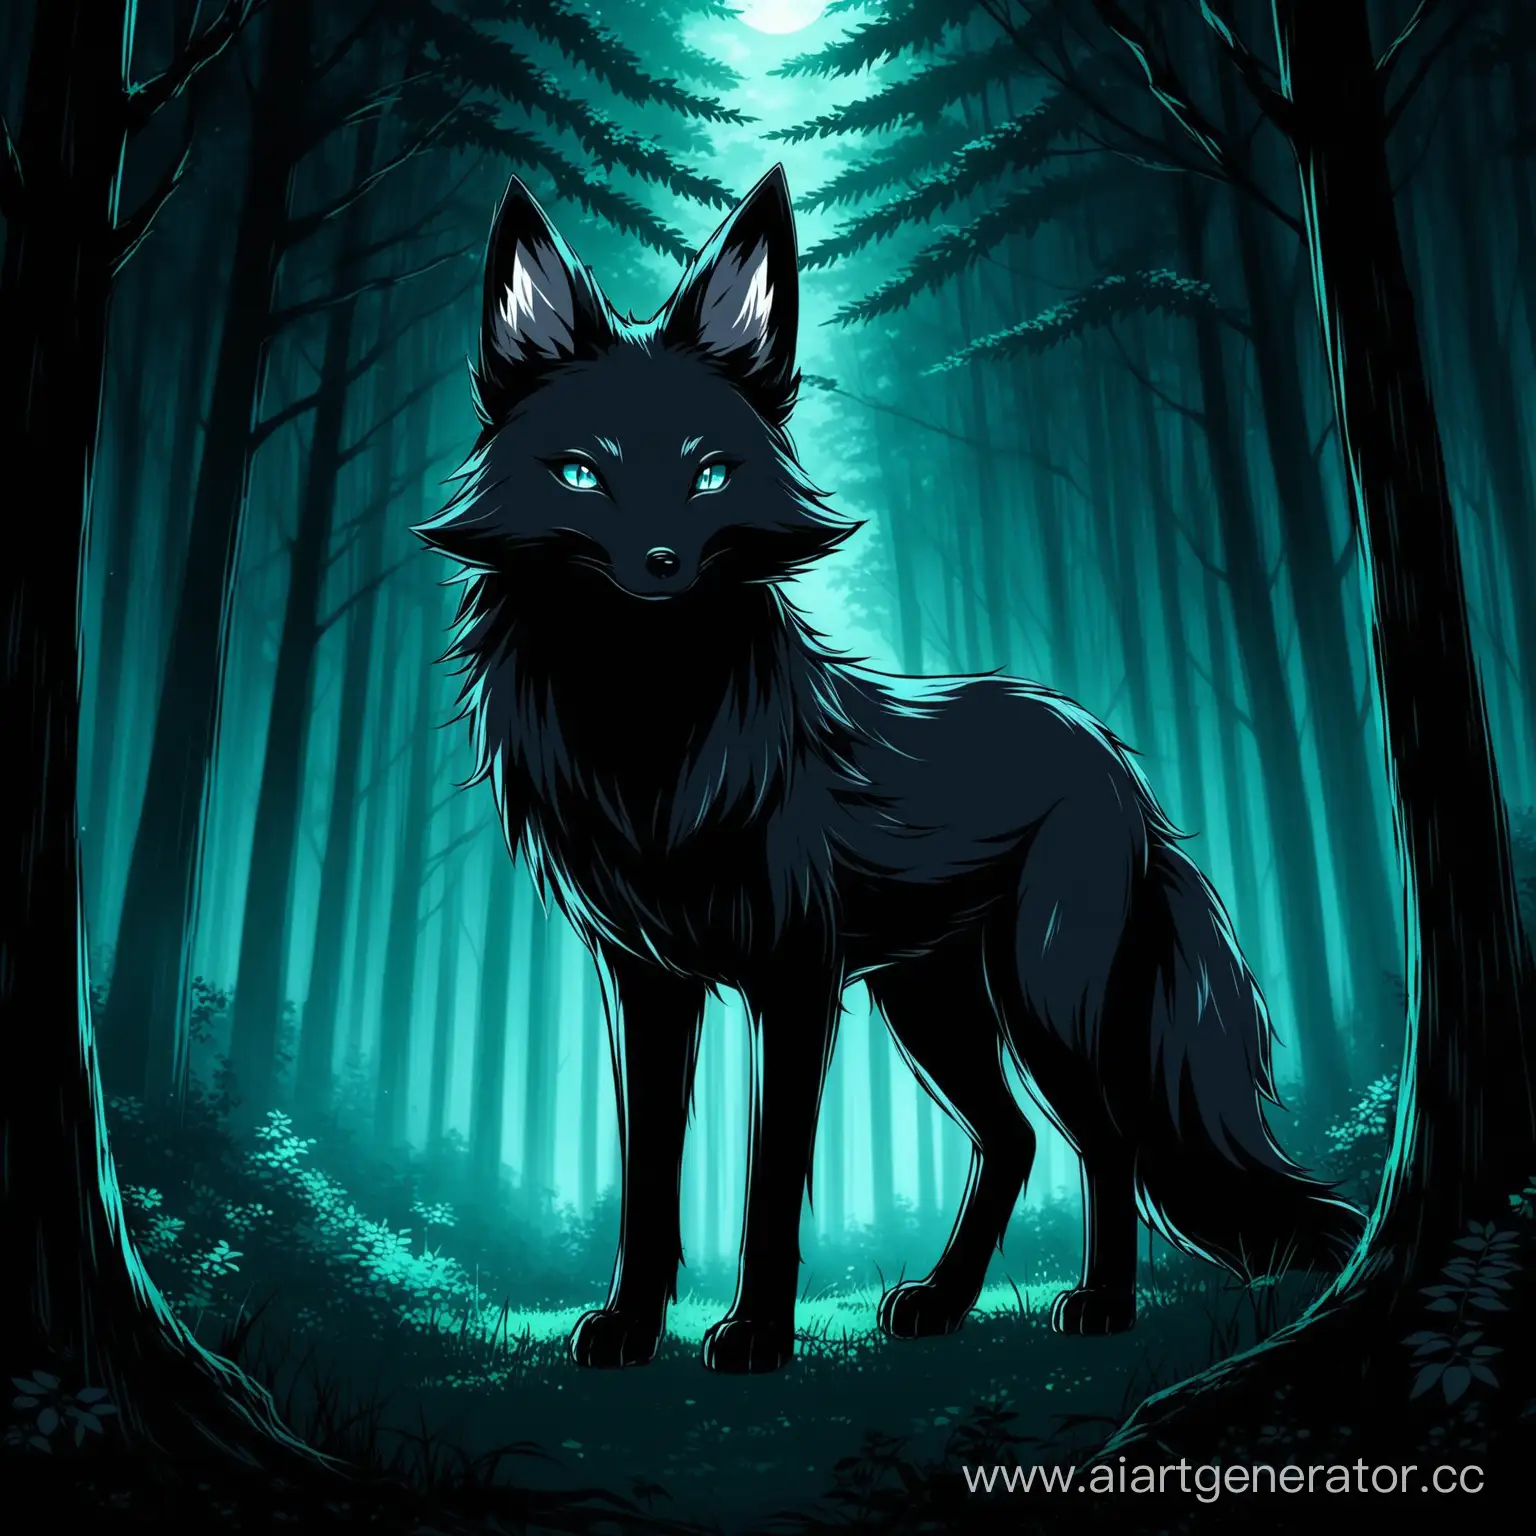 Mysterious-Black-Fox-Roaming-the-Enchanted-Dark-Forest-Anime-Style-Artwork